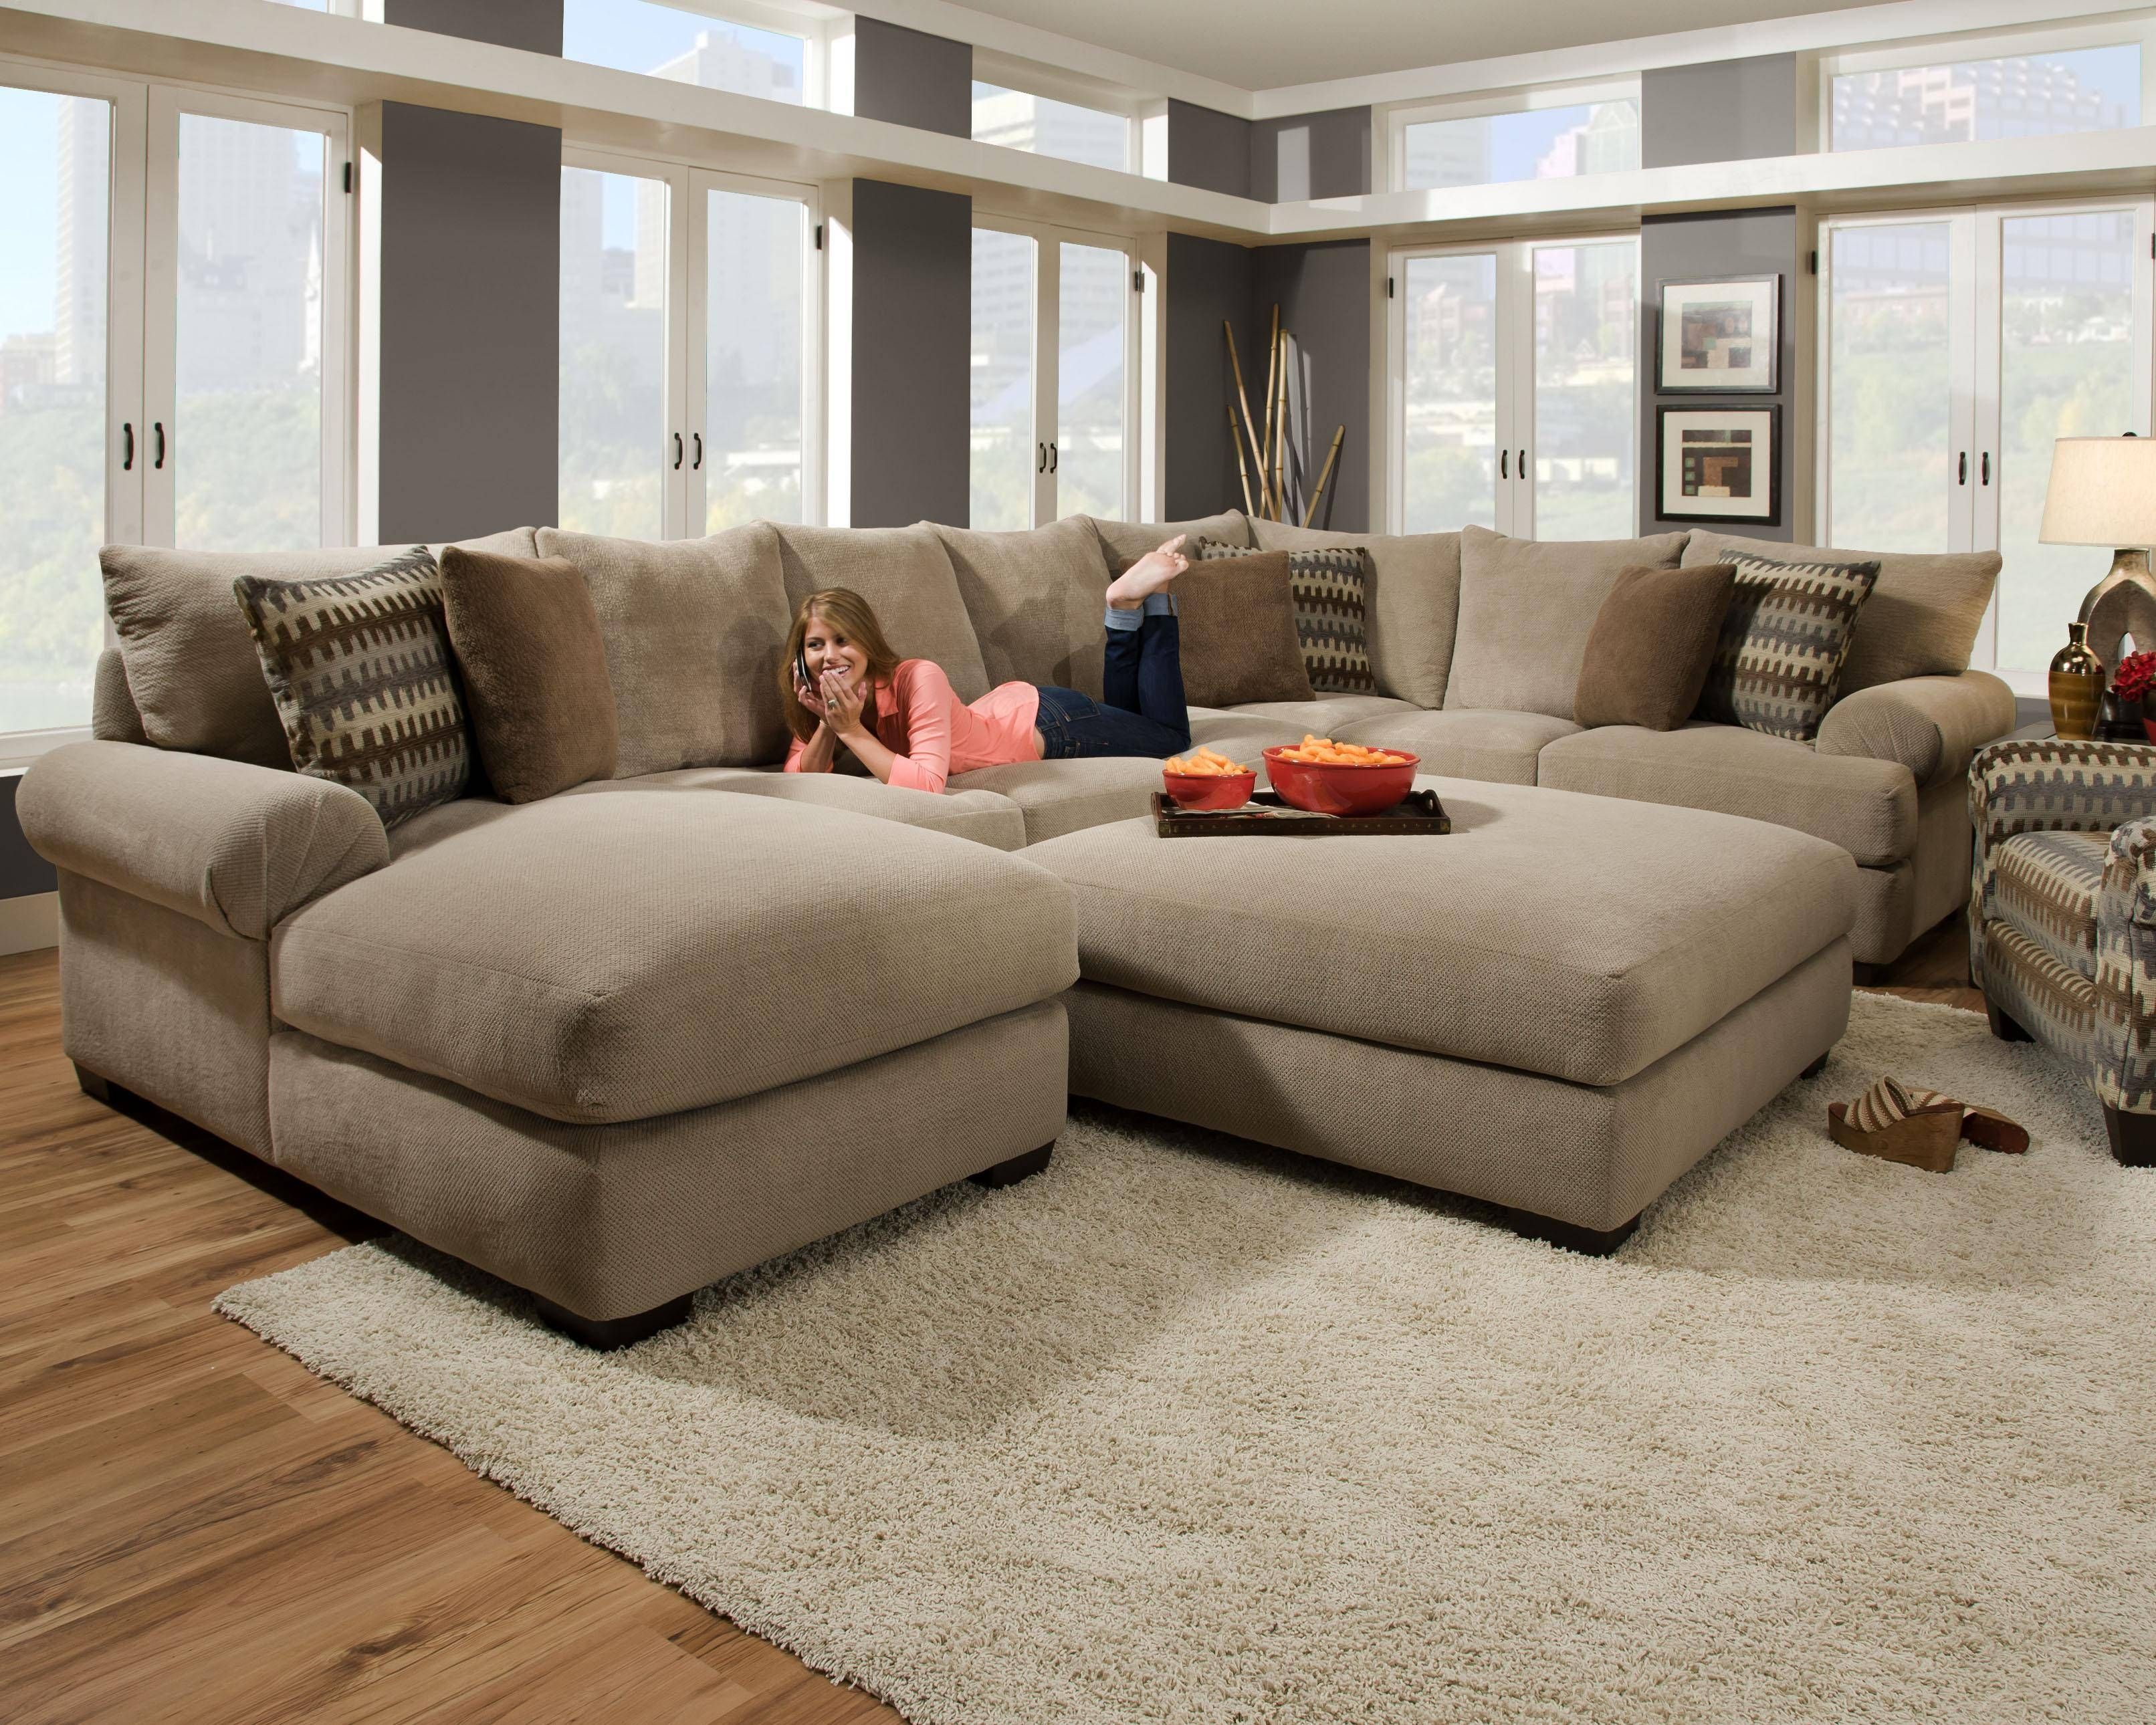 Furniture: Www Biglot | Big Lots Couches | Big Lots Sectionals Regarding Big Lots Couches (View 12 of 15)